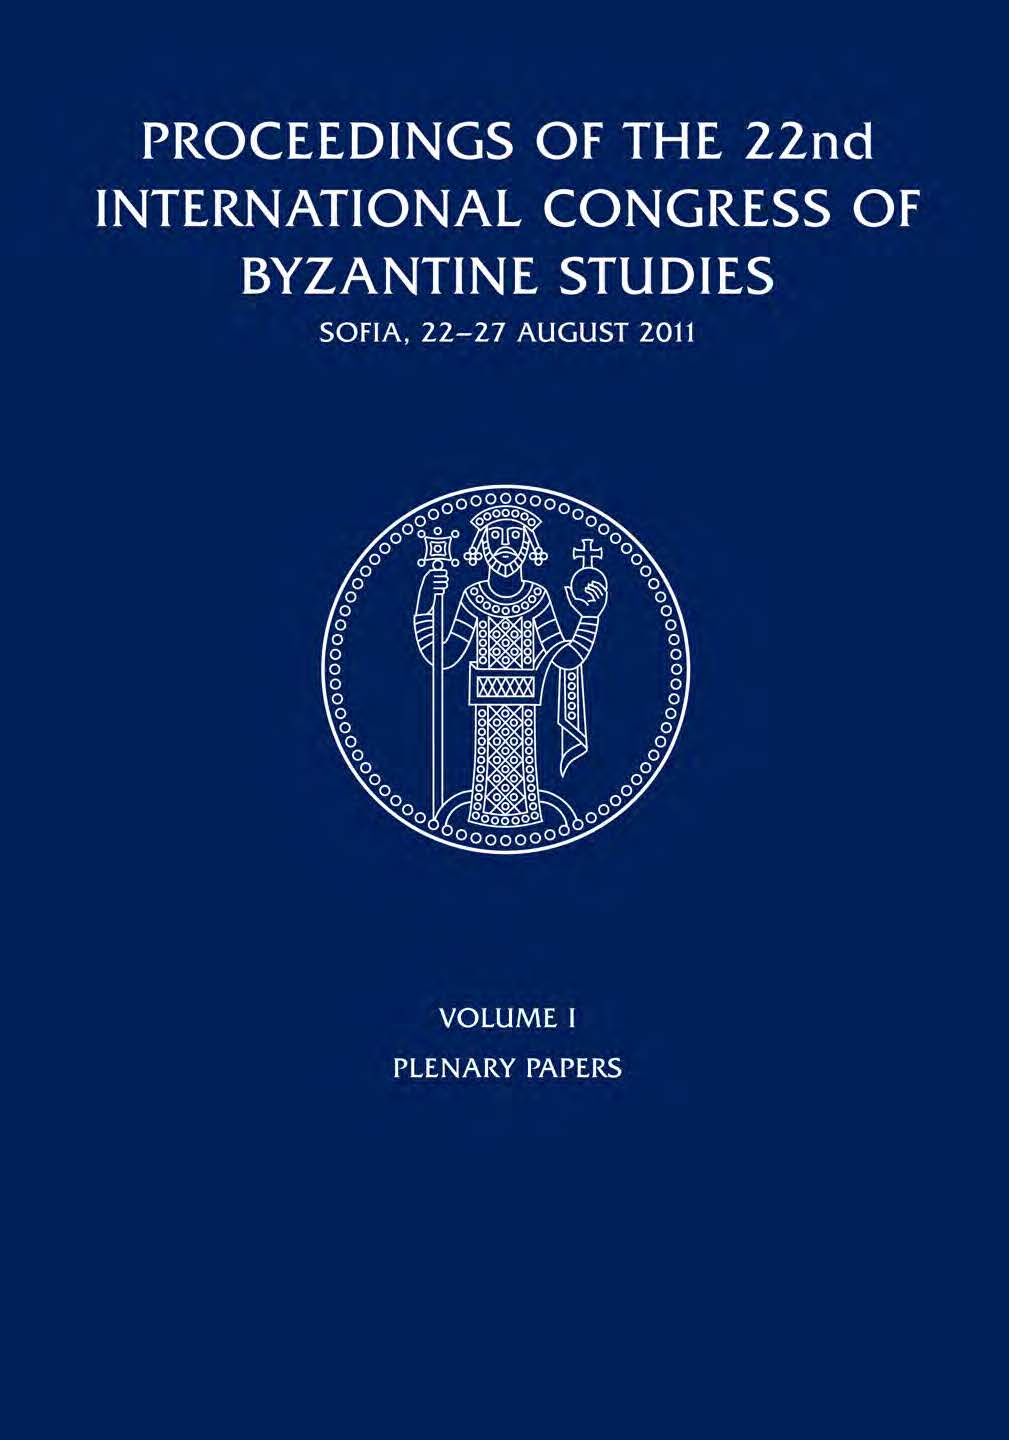 Information Approach to Studying Byzantine Law: the Lexis and Texts